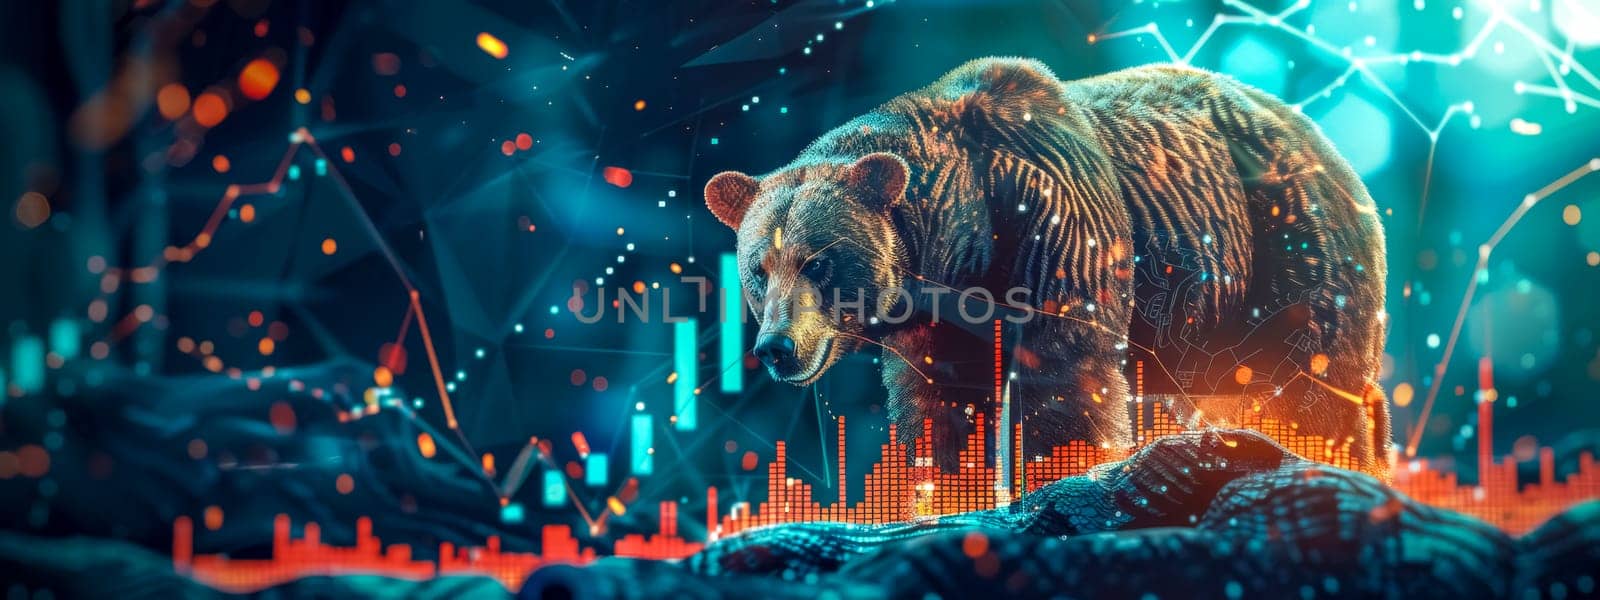 Conceptual image of a bear superimposed on dynamic stock market graphics